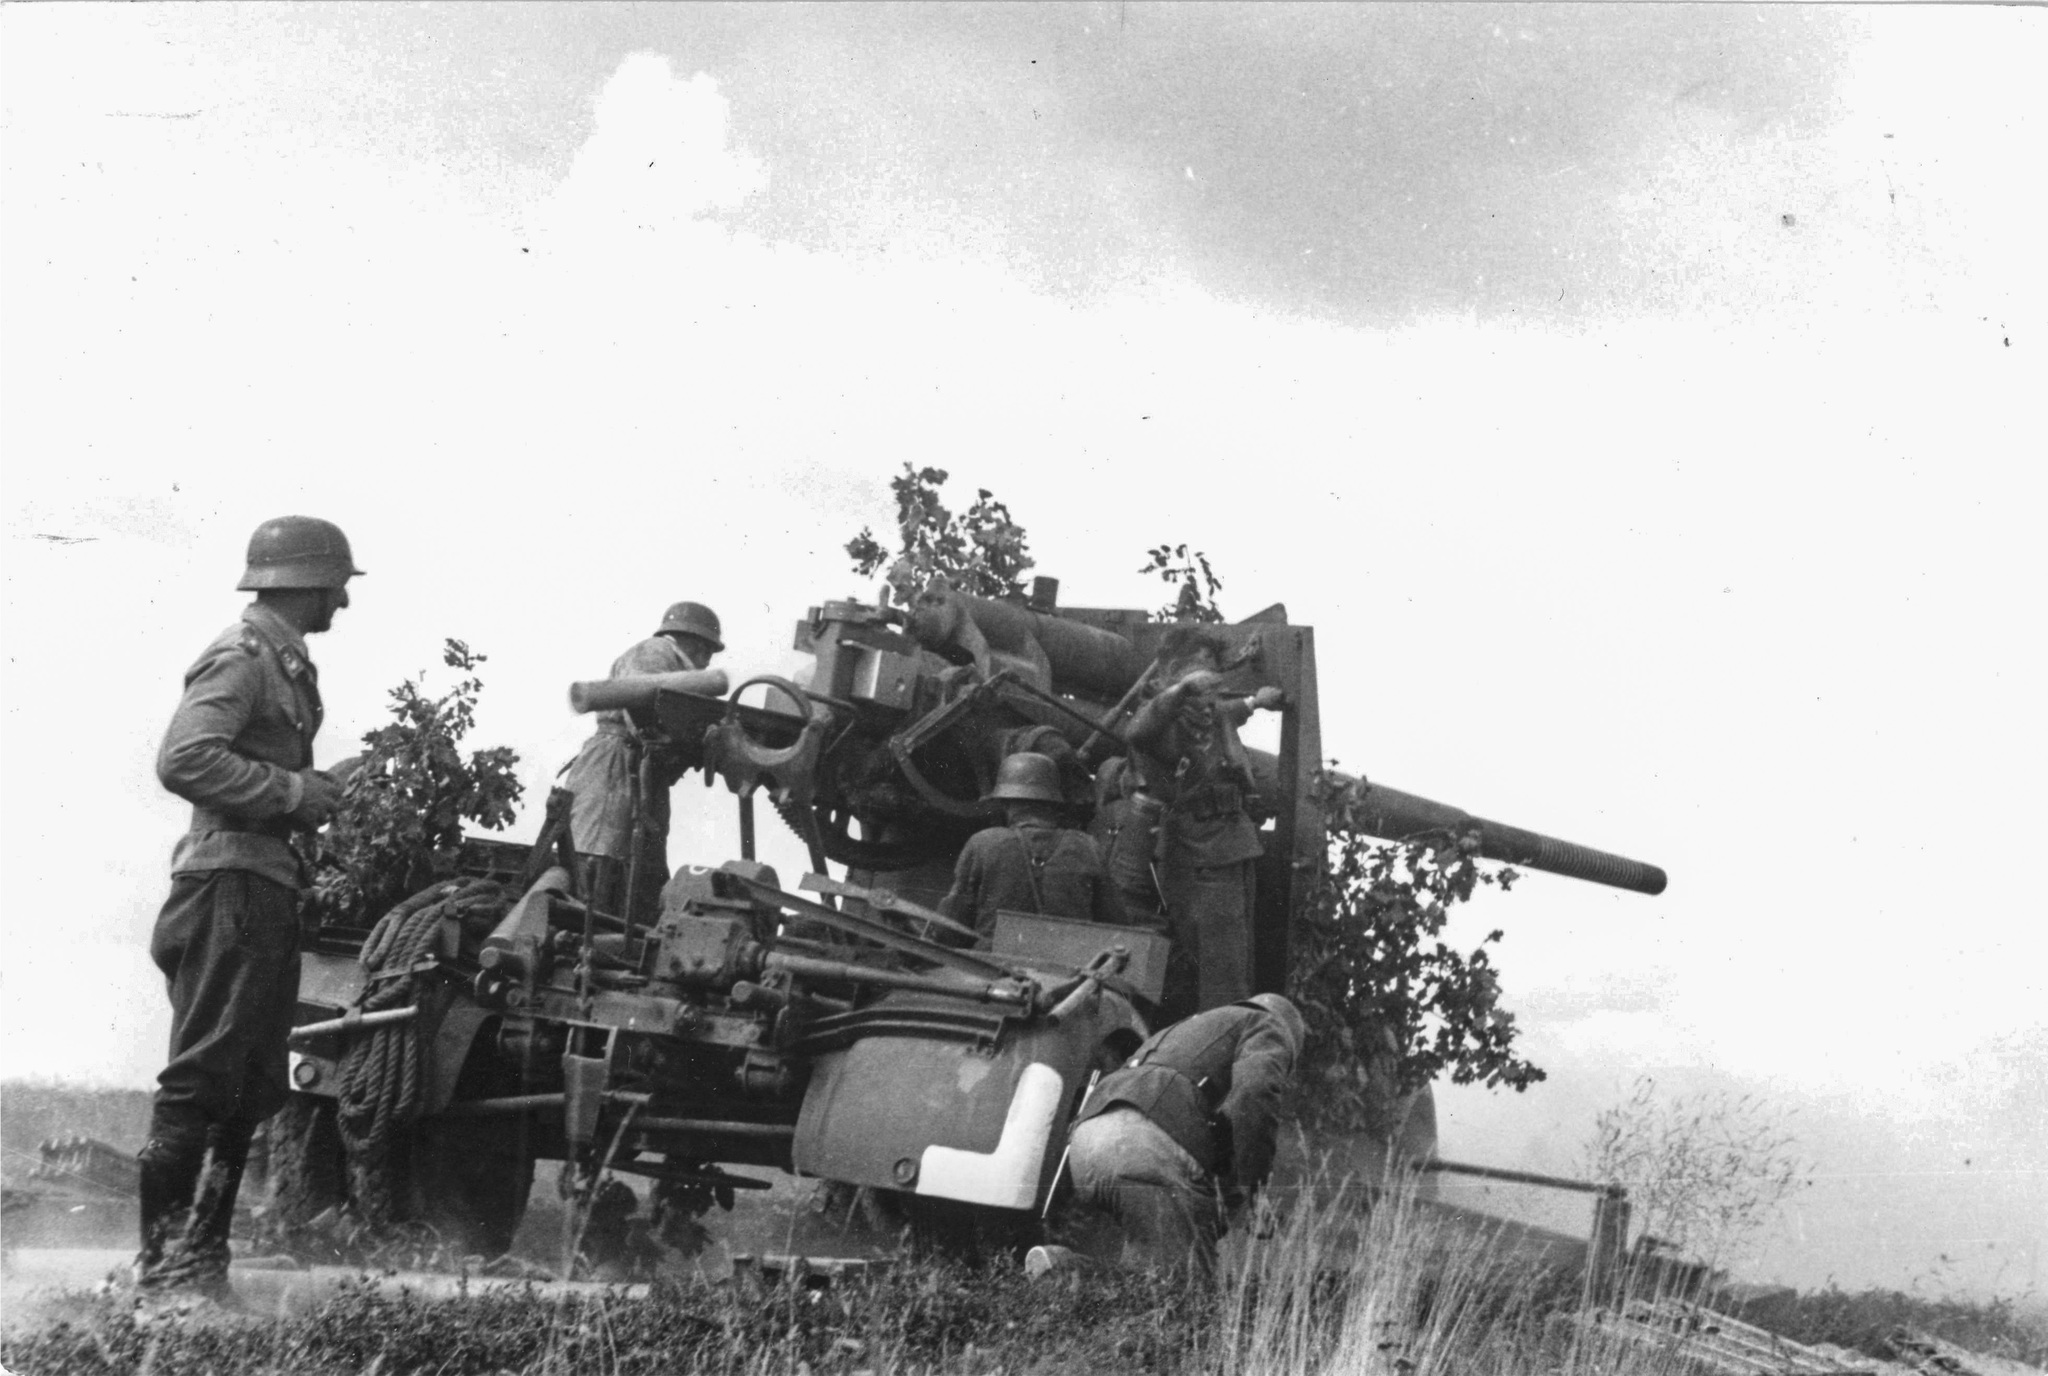 The German general was shocked by the invulnerability of the KV-1 tank - The Great Patriotic War, The Second World War, WWII participants, Tanks, Tankers, Third Reich, General, Wehrmacht, , Red Army, Form of the Red Army, KV-1, tank stories, Reich, Video, Longpost